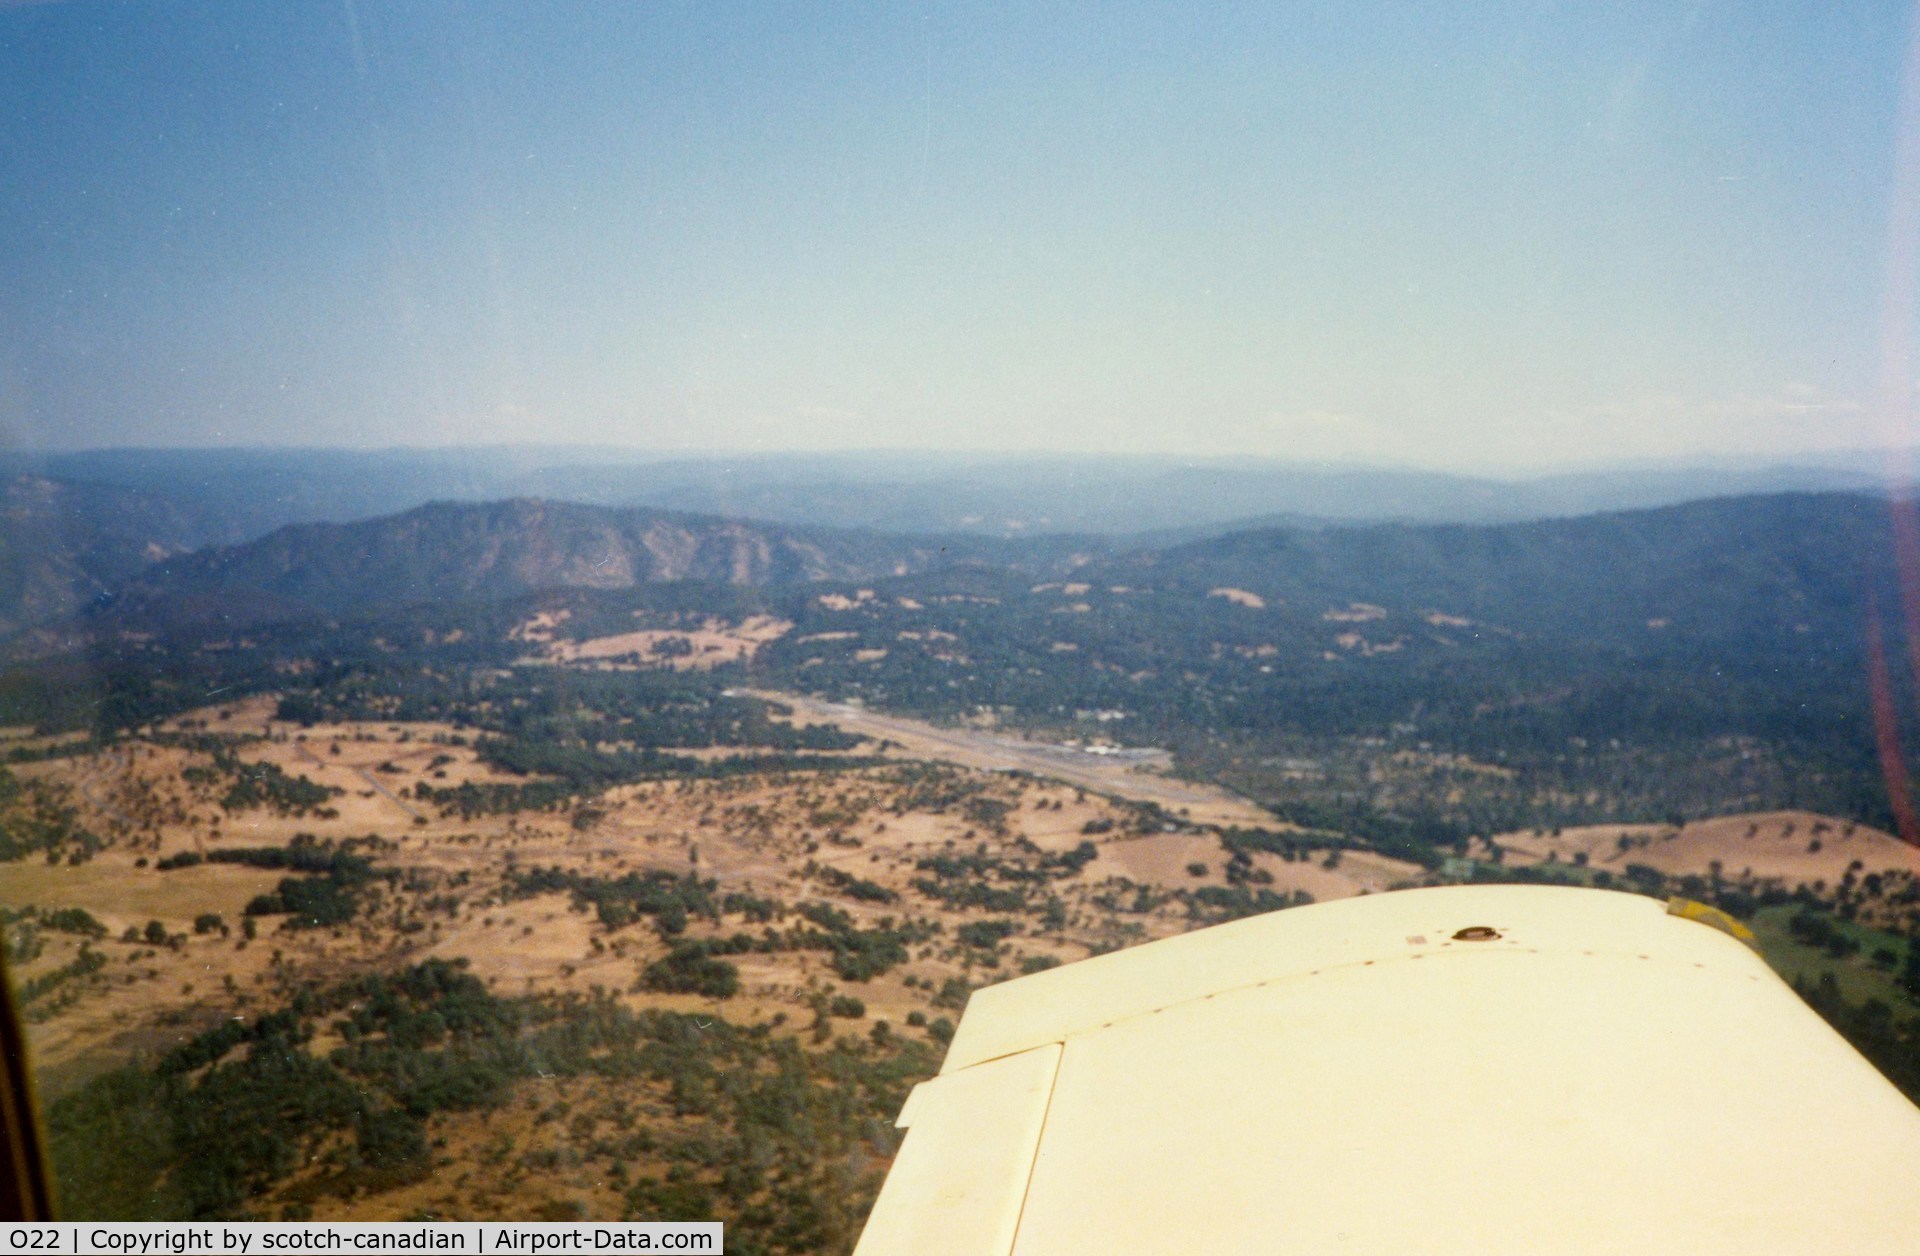 Columbia Airport (O22) - Columbia Airport, CA - photographed from 1974 Grumman American Aviation Corp. AA-1B N9881L - July 1989 